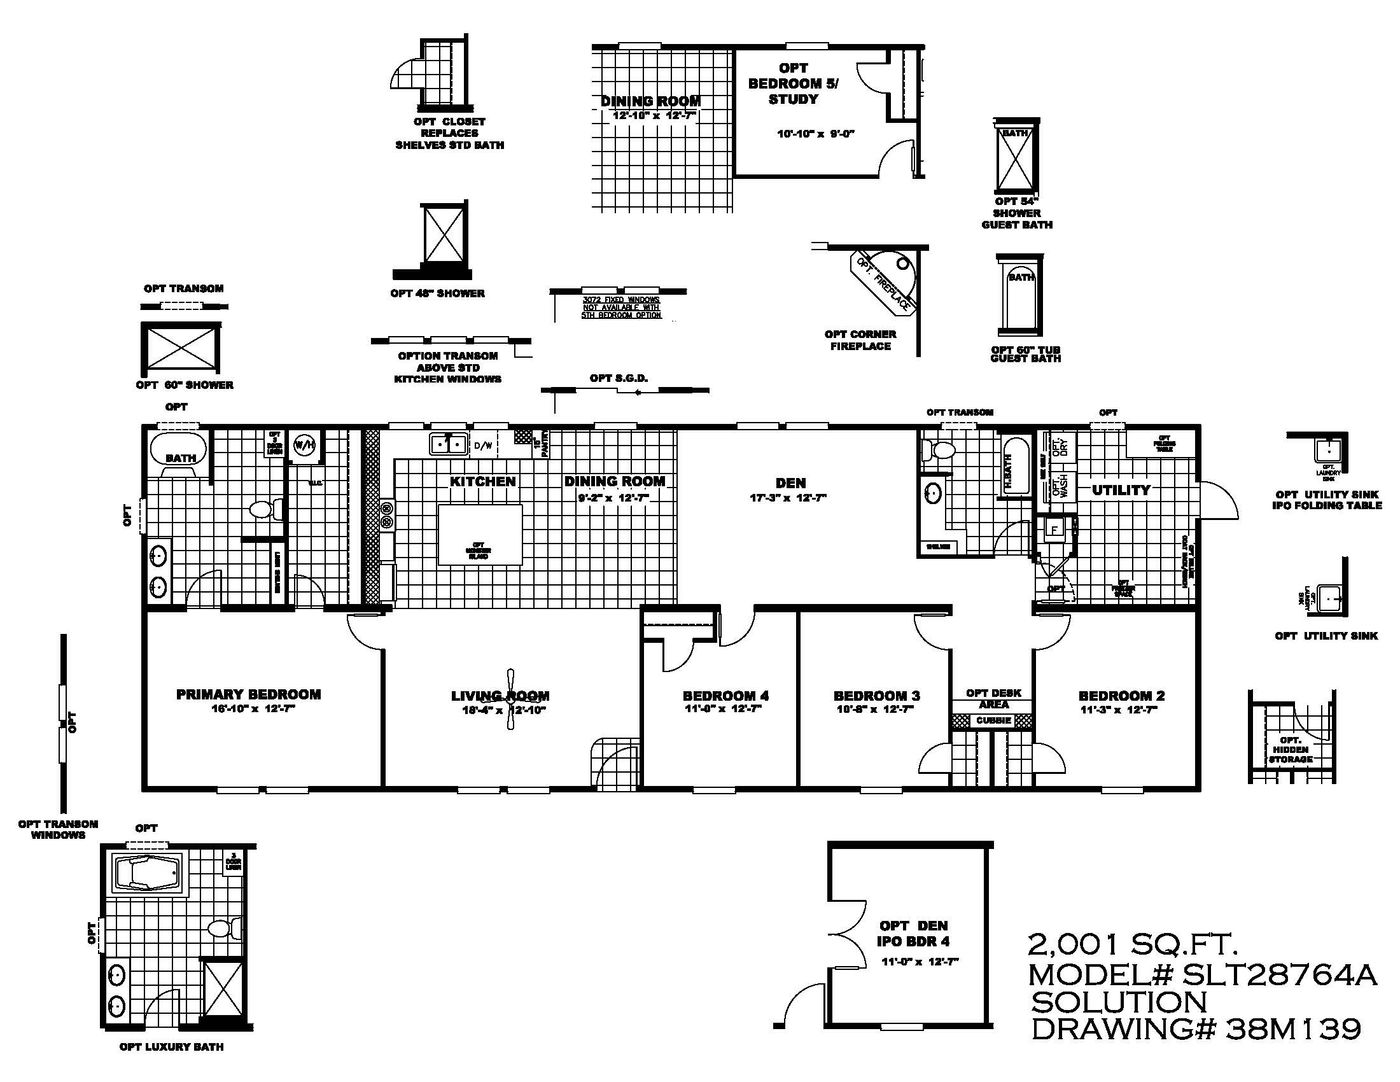 The Absolute Value Floor Plan